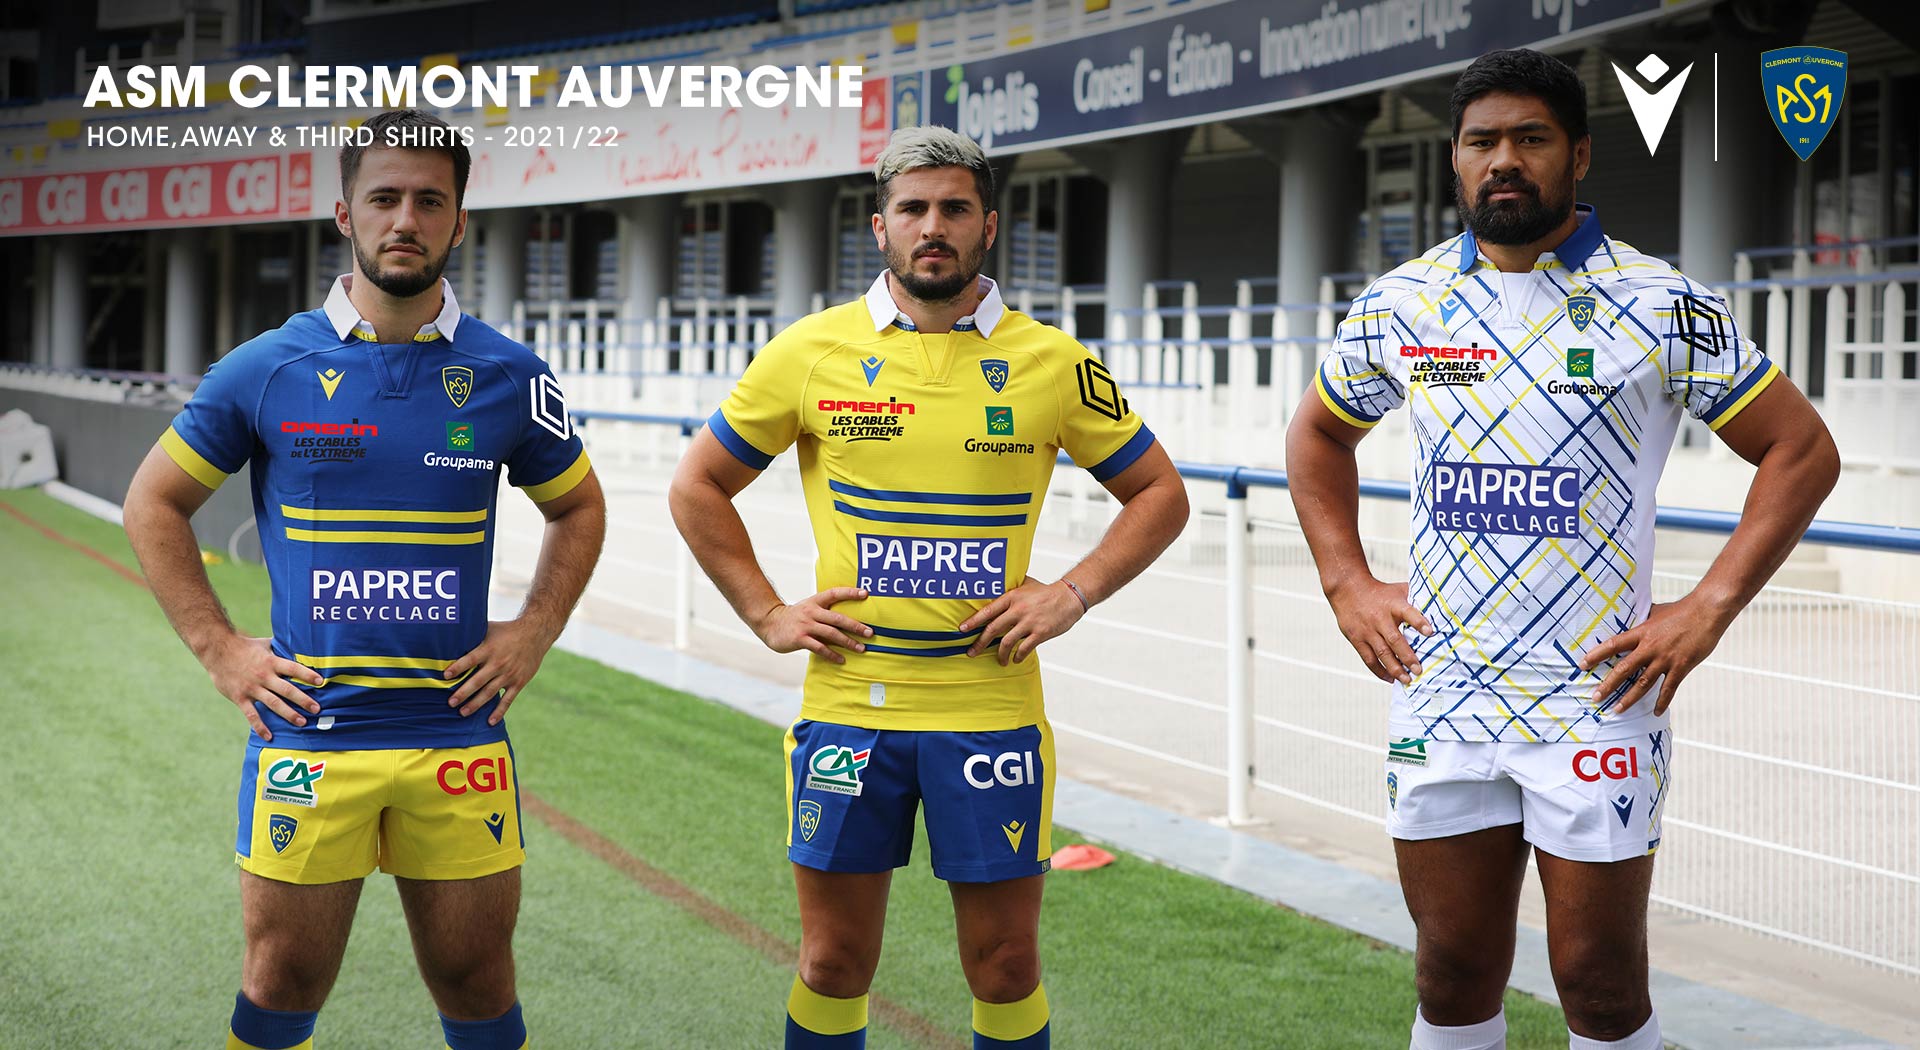 ASM CLERMONT AUVERGNE'S NEW ECO-FABRIC SHIRTS CHANNEL 110 YEARS OF HISTORY